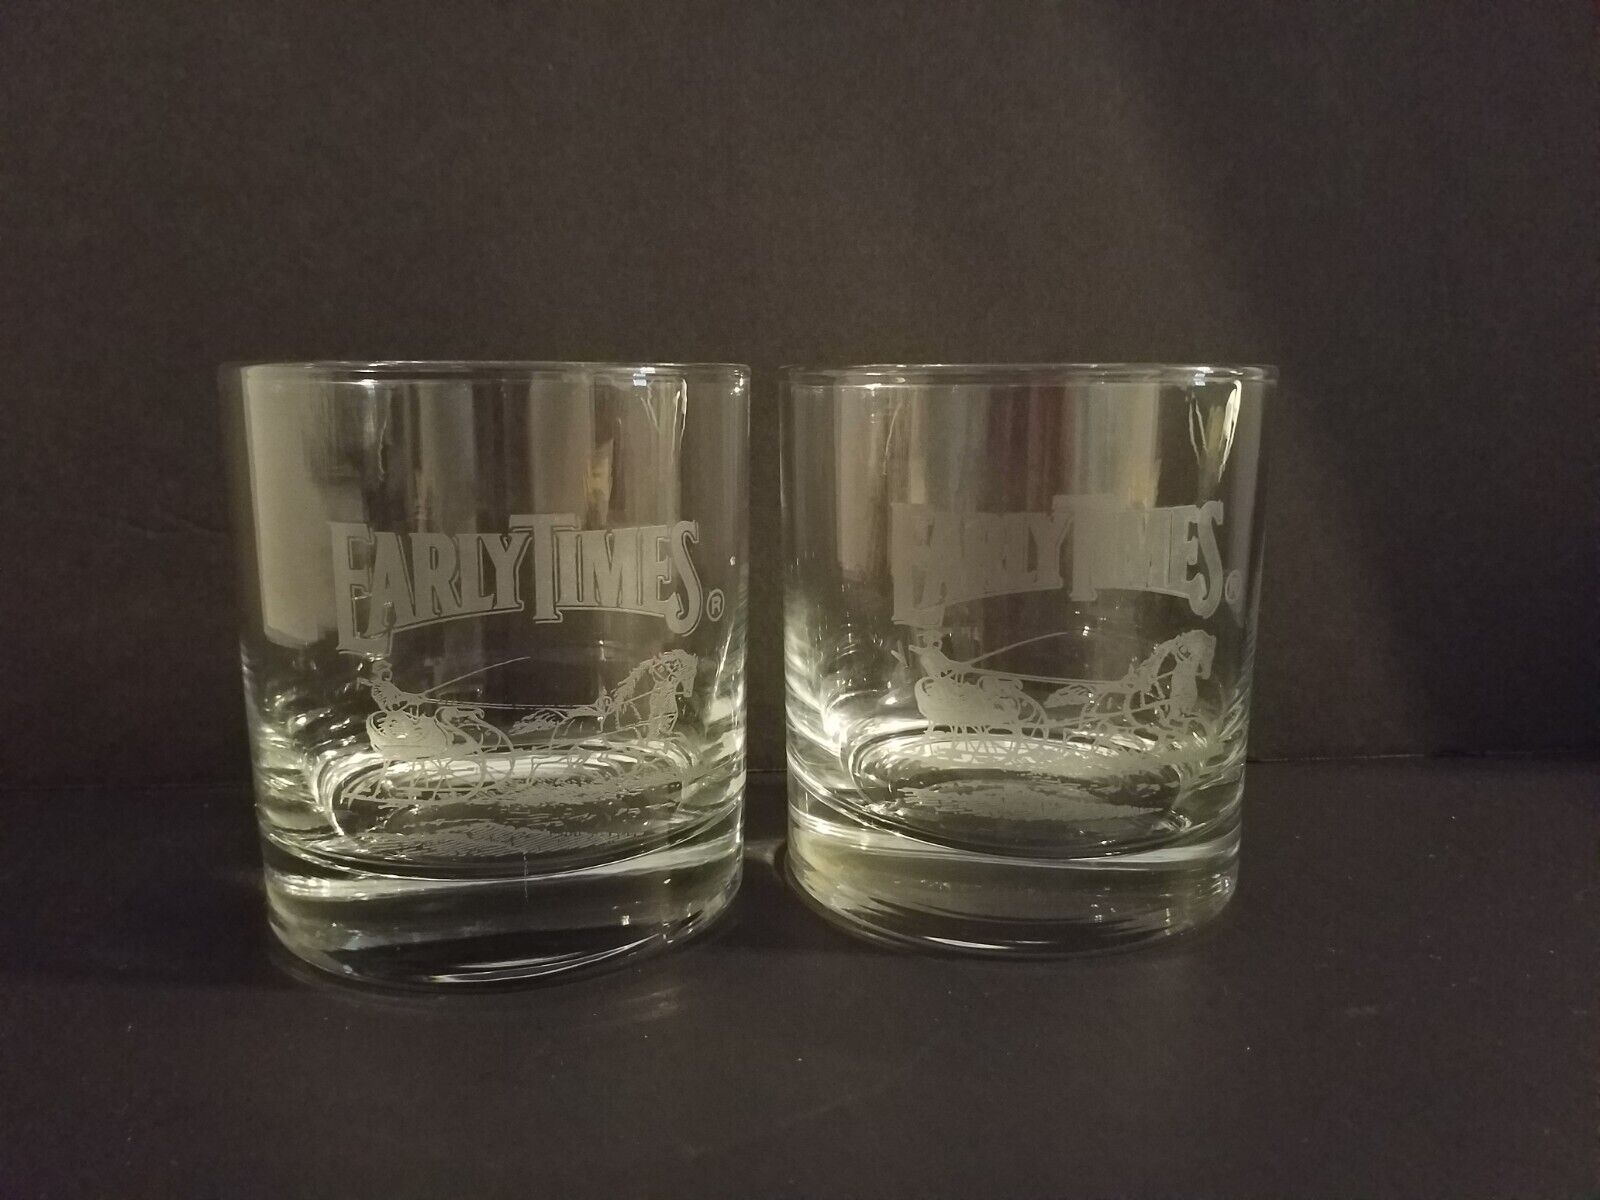 1994 Early Times Kentucky Whiskey Glasses Holiday Glasses With Horse And Sleigh